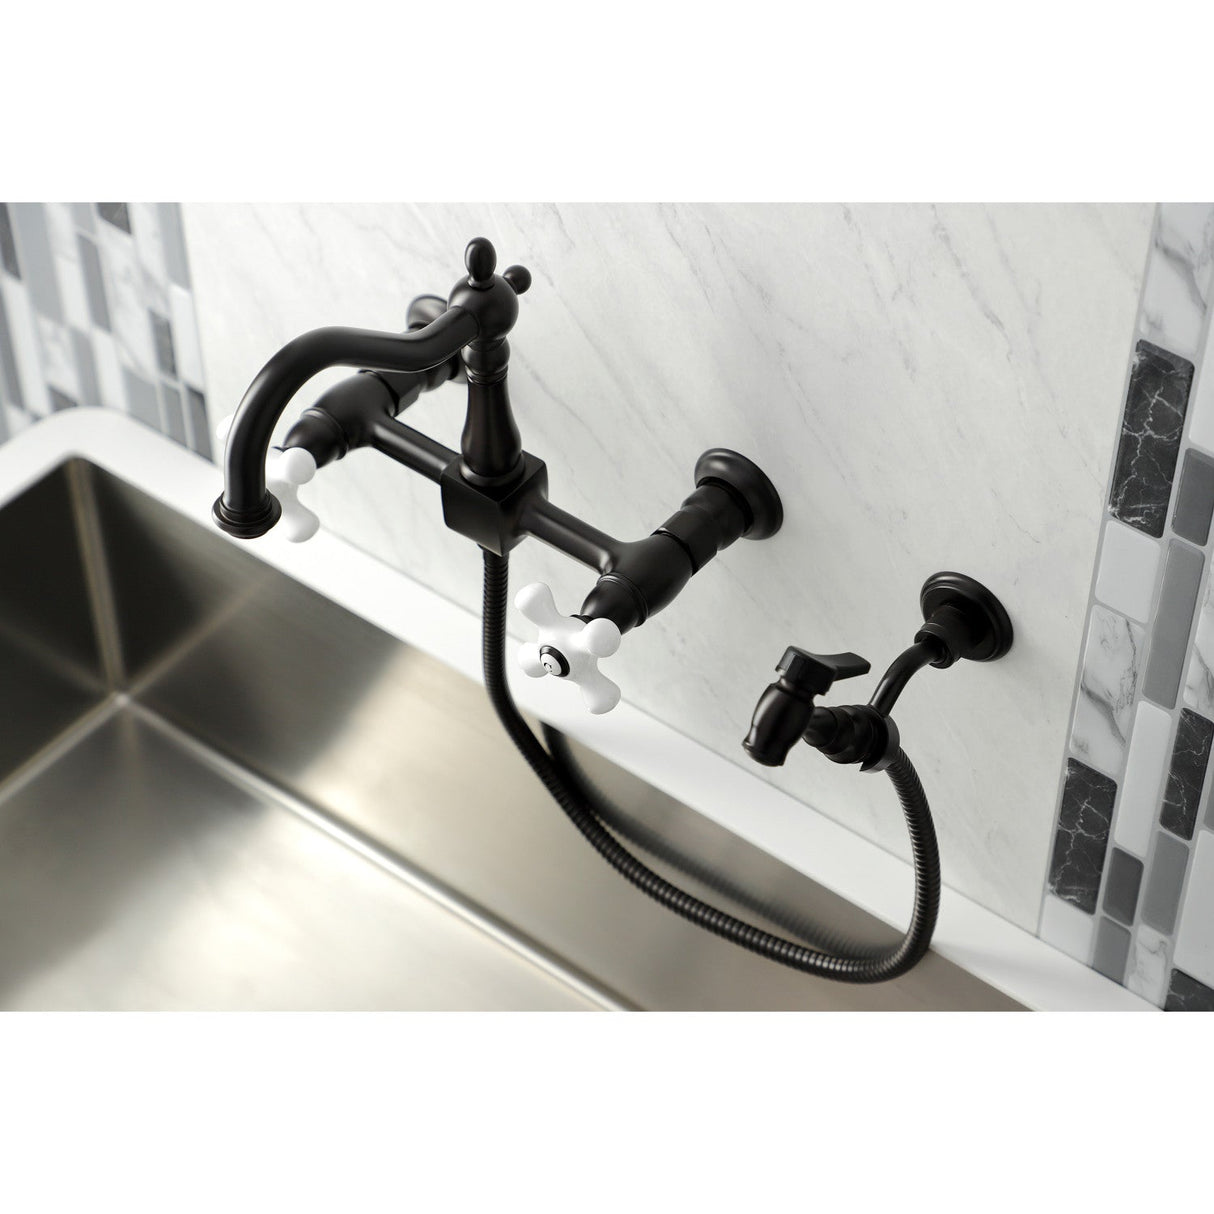 Heritage KS1265PXBS Two-Handle 2-Hole Wall Mount Bridge Kitchen Faucet with Brass Sprayer, Oil Rubbed Bronze